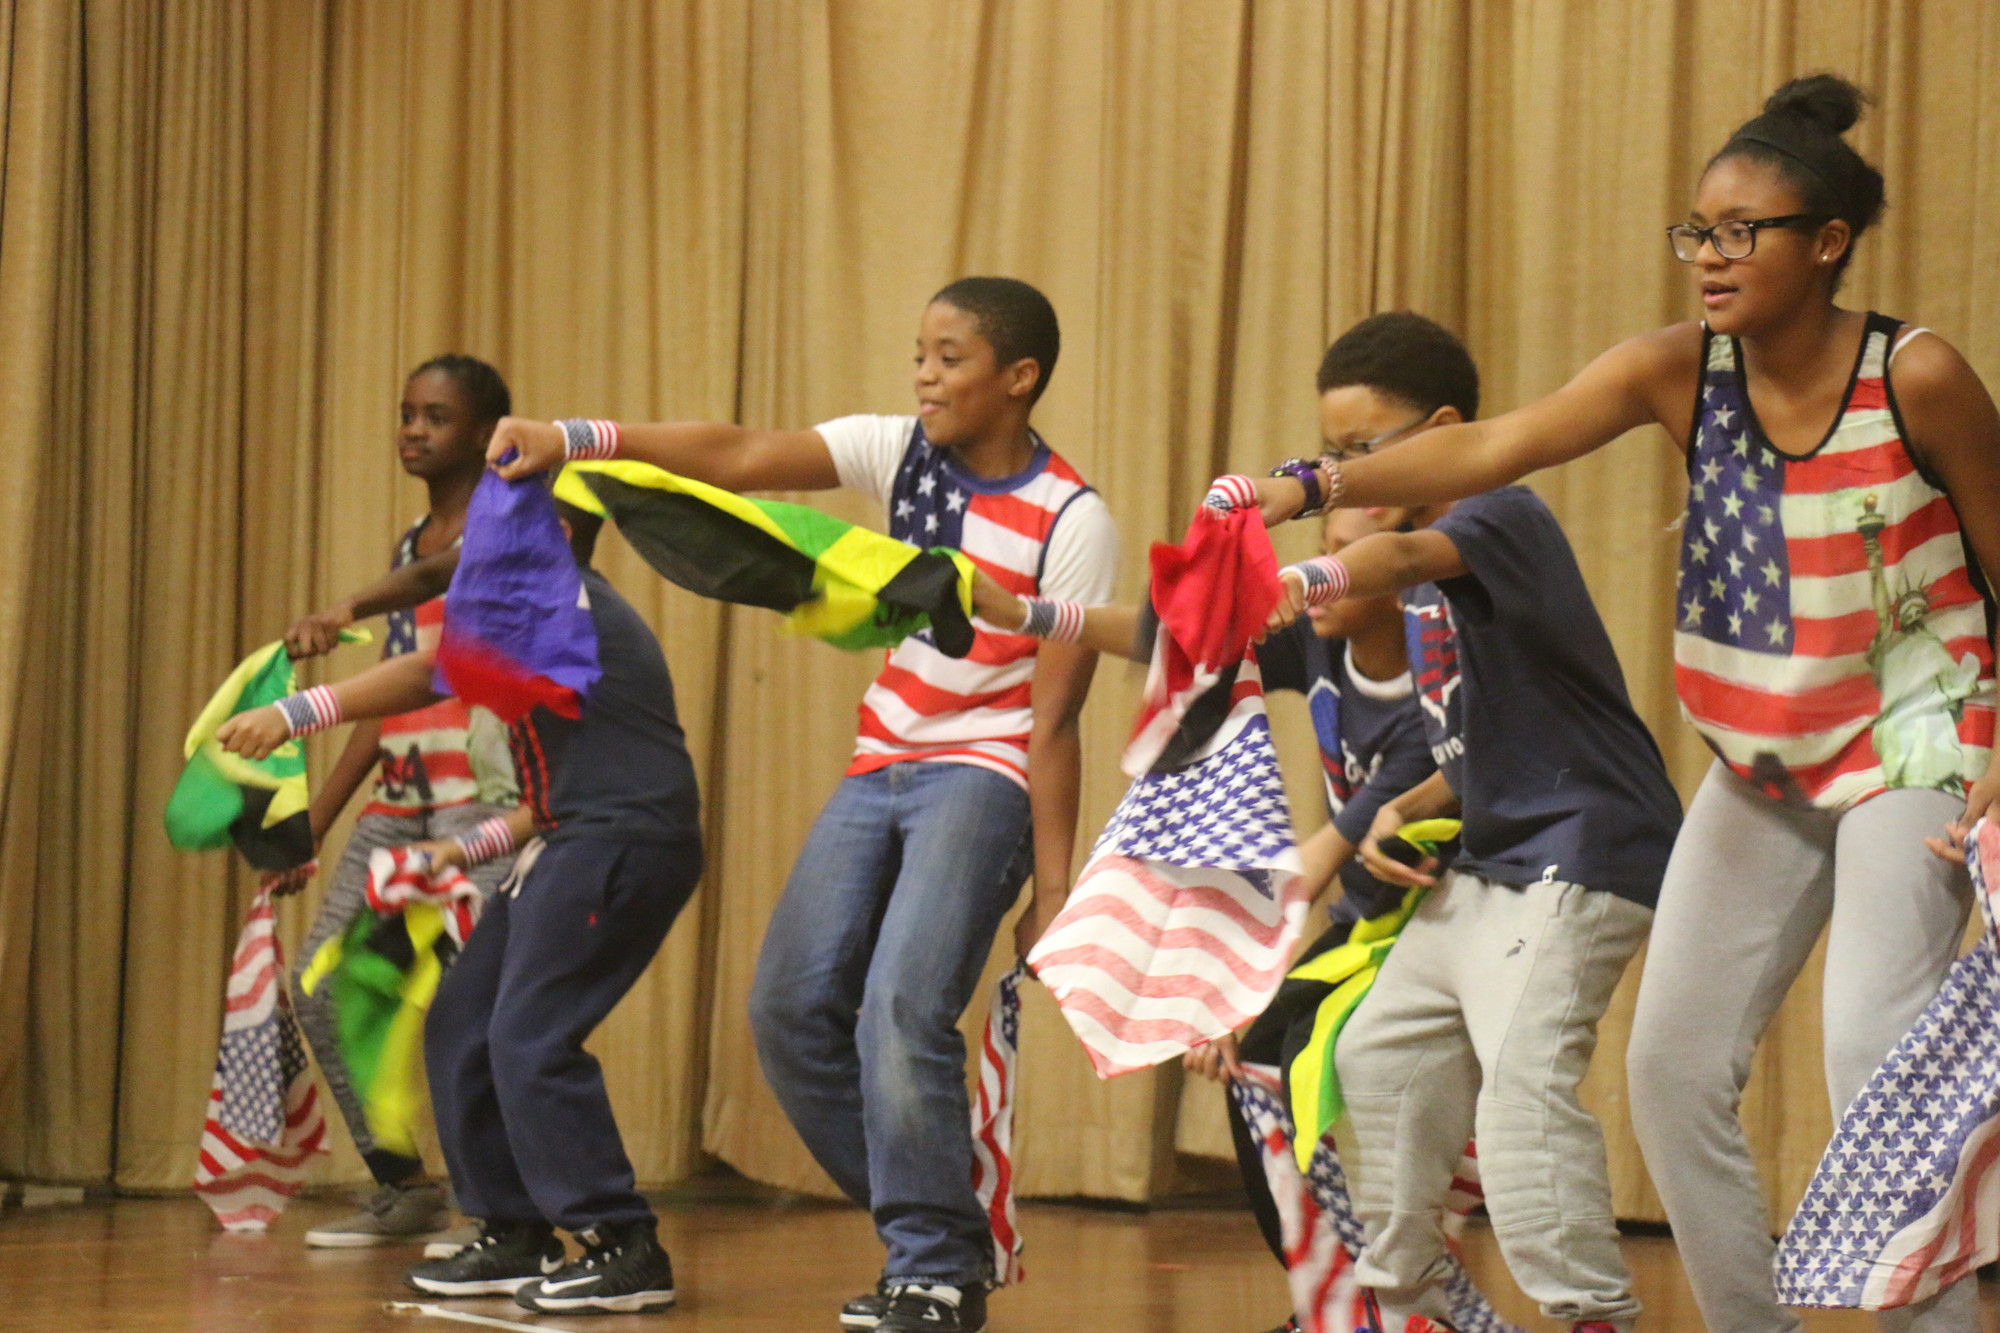 Students danced to “Watch Me (Whip/Nae Nae)” with American, Haitian and Jamaican flags.